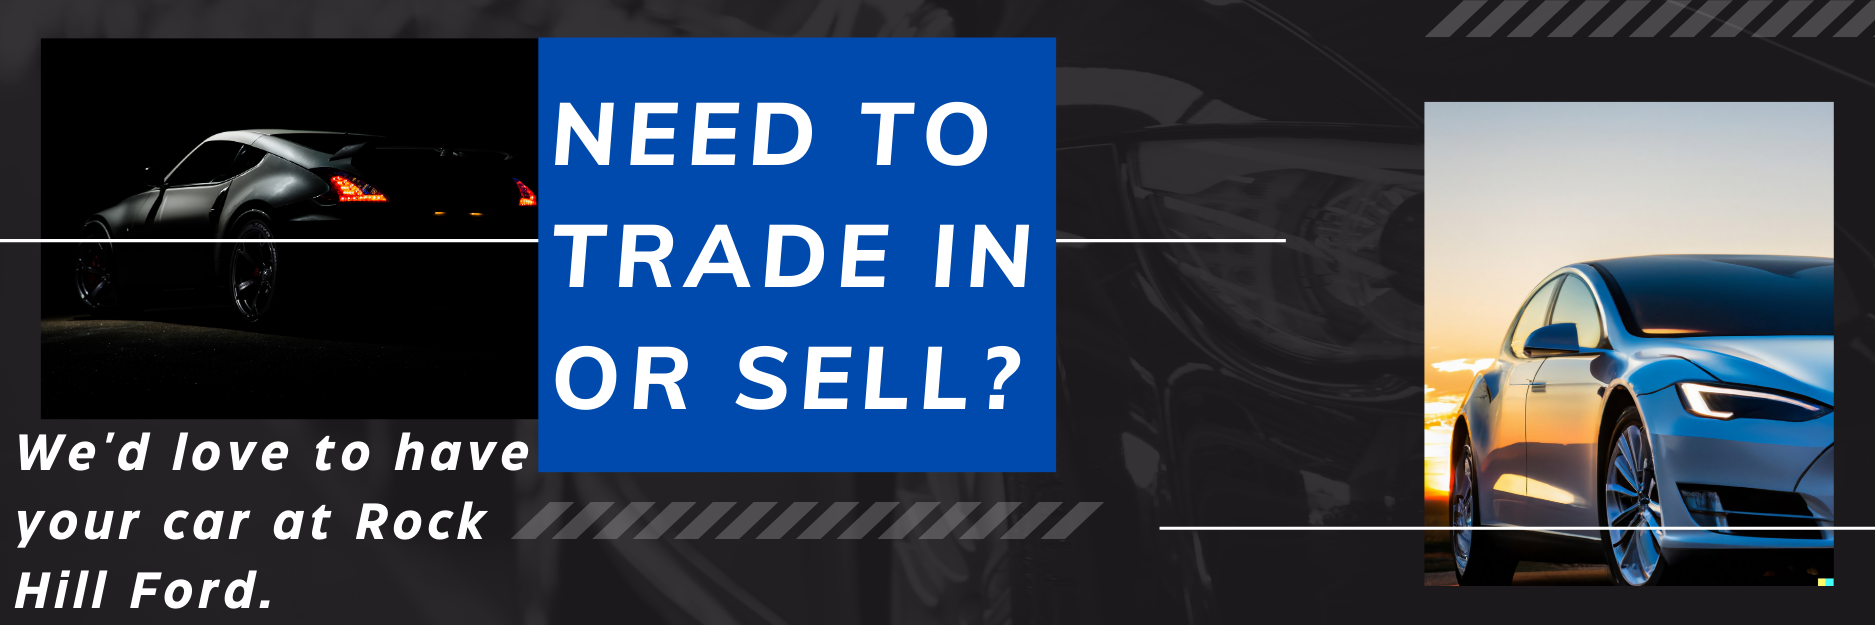 Need to trade in or sell? We'd love to have your car at Rock Hill Ford.